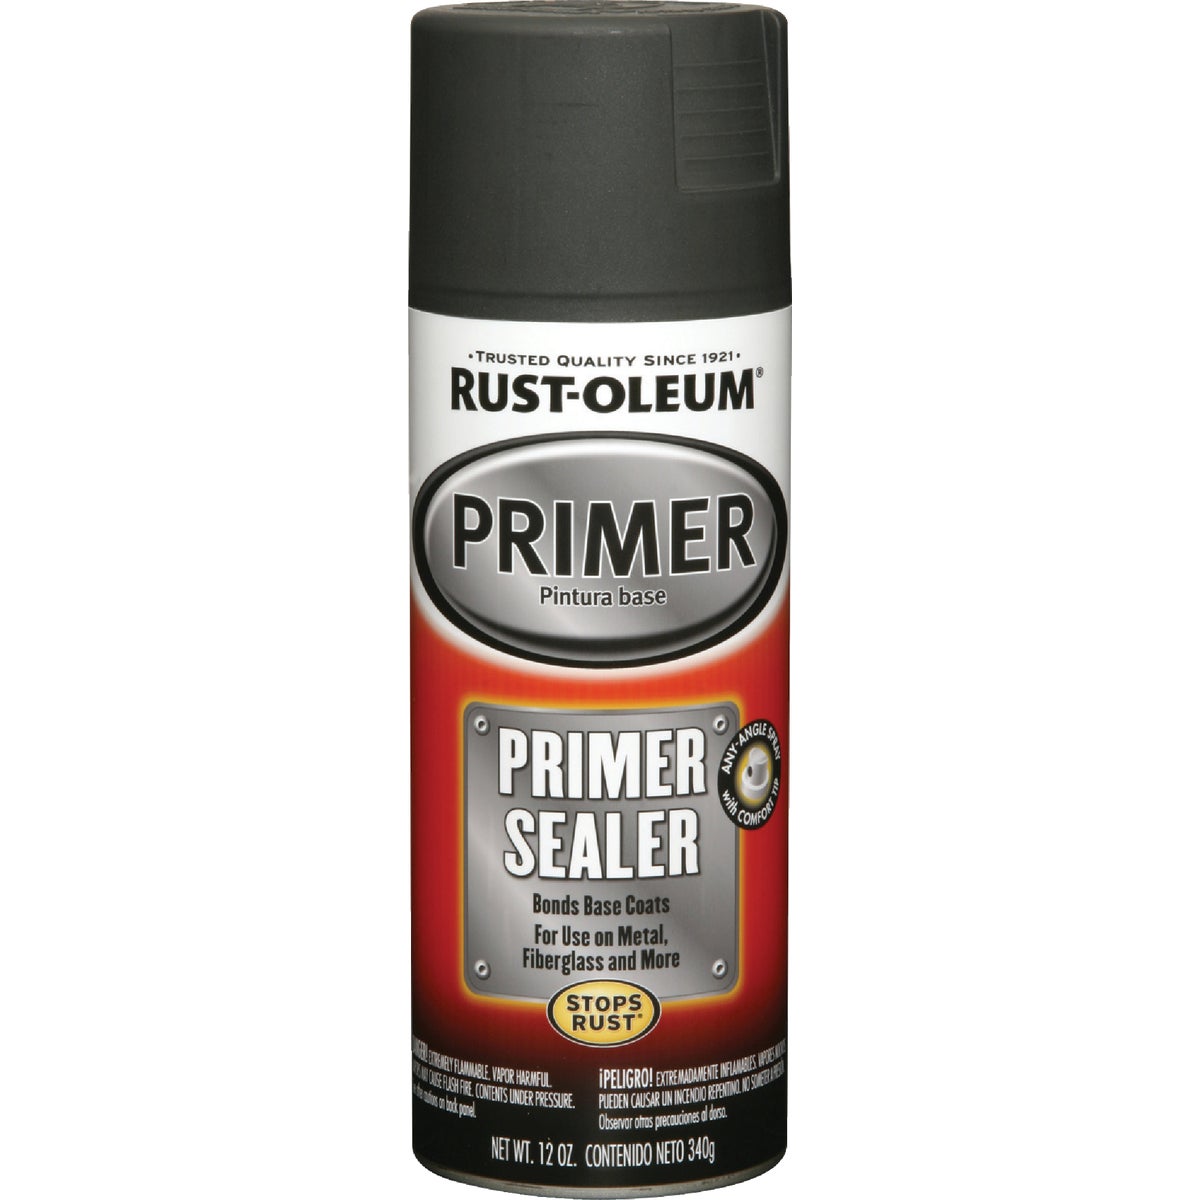 Item 795304, A sprayable formula that prevents paint from soaking into a primed surface